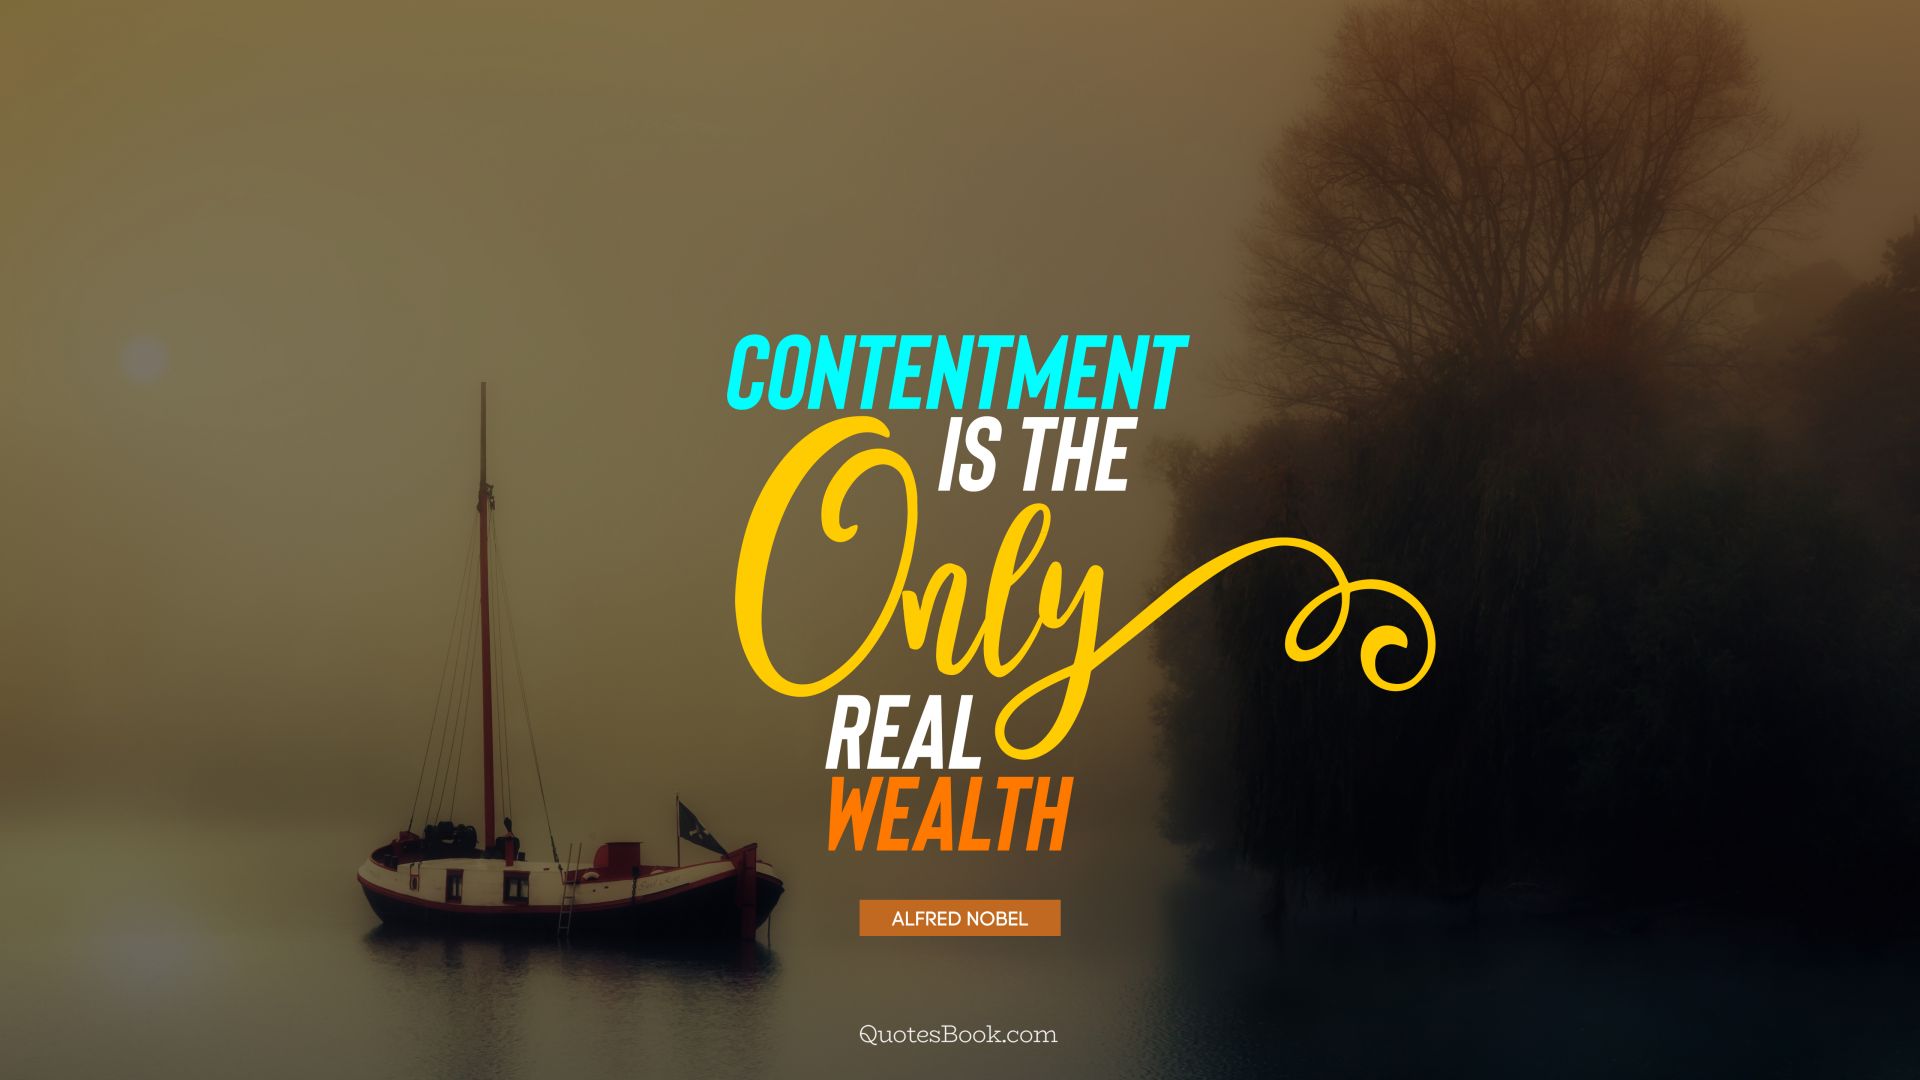 Contentment is the only real wealth. - Quote by Alfred Nobel